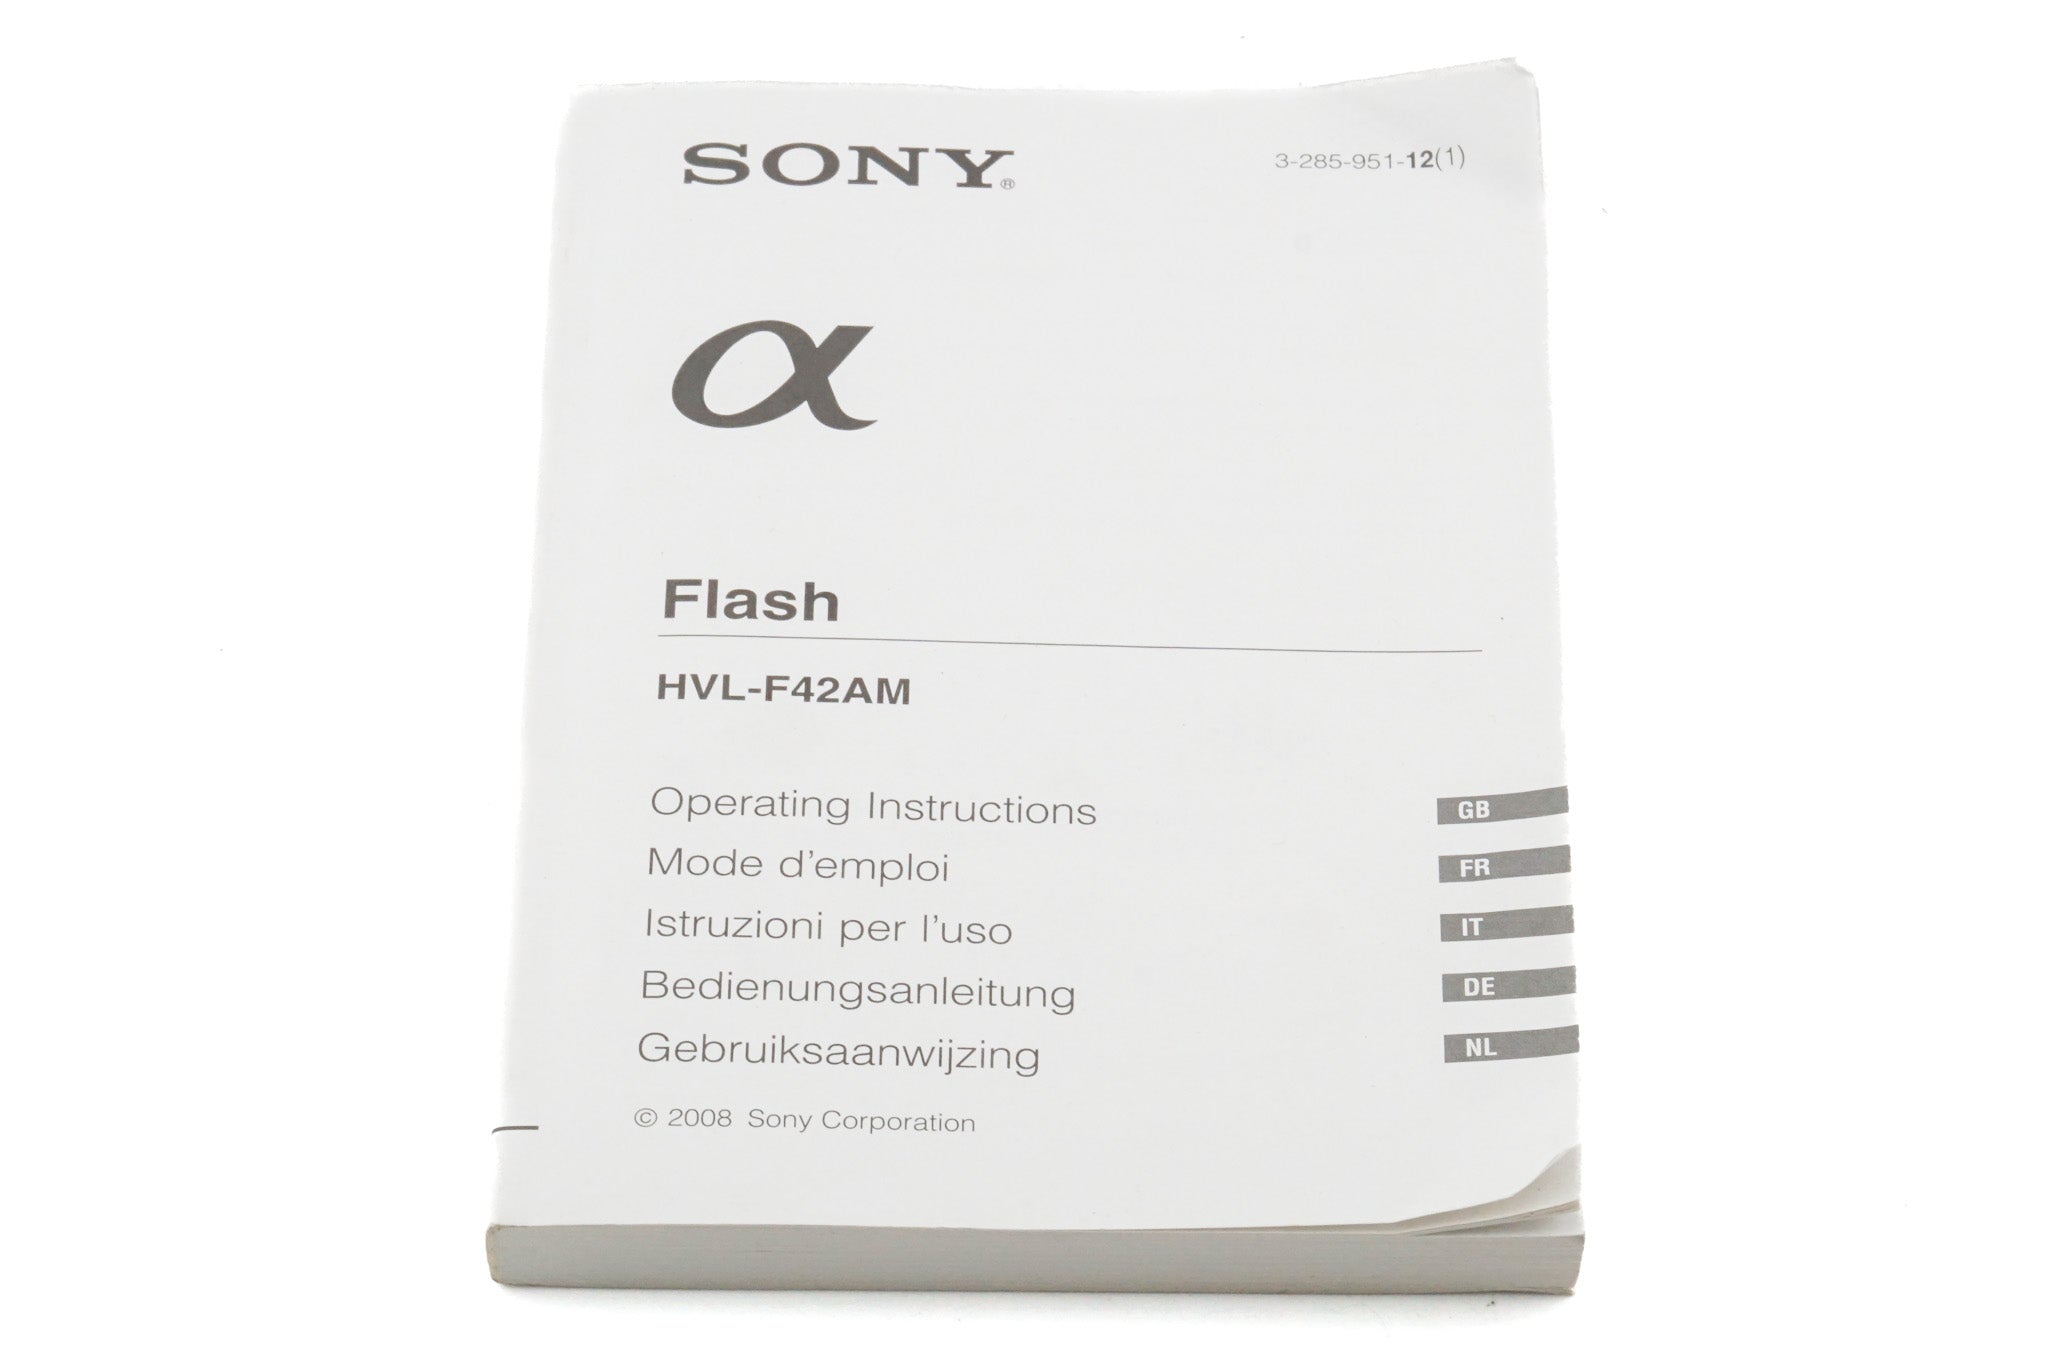 Sony HVL-F42AM Flash Instructions - Accessory